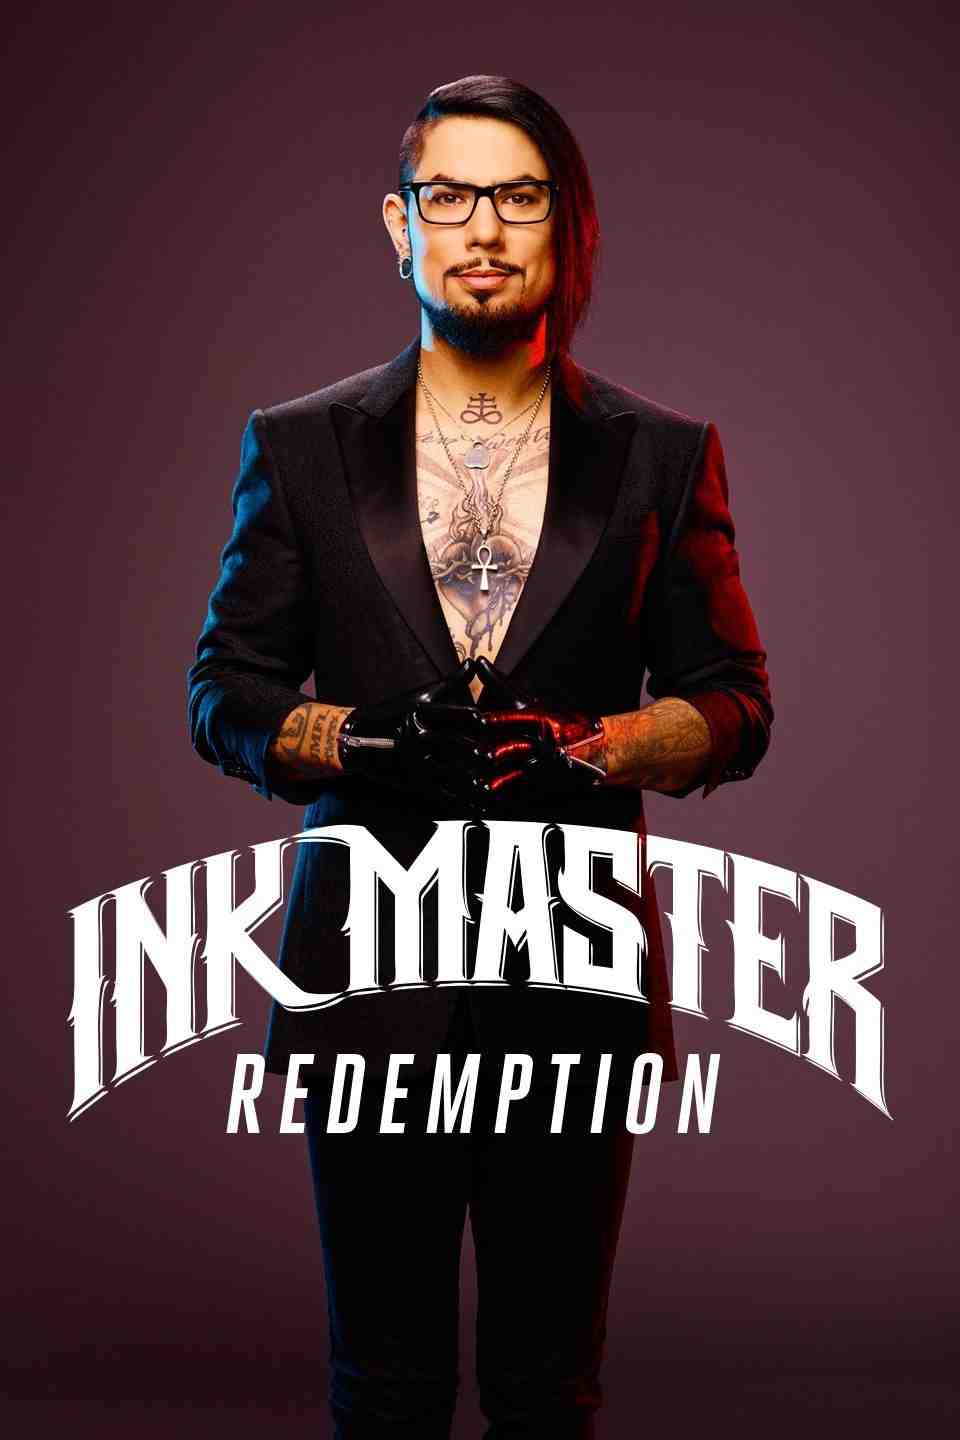 Why did Ashley from Ink Master quit?